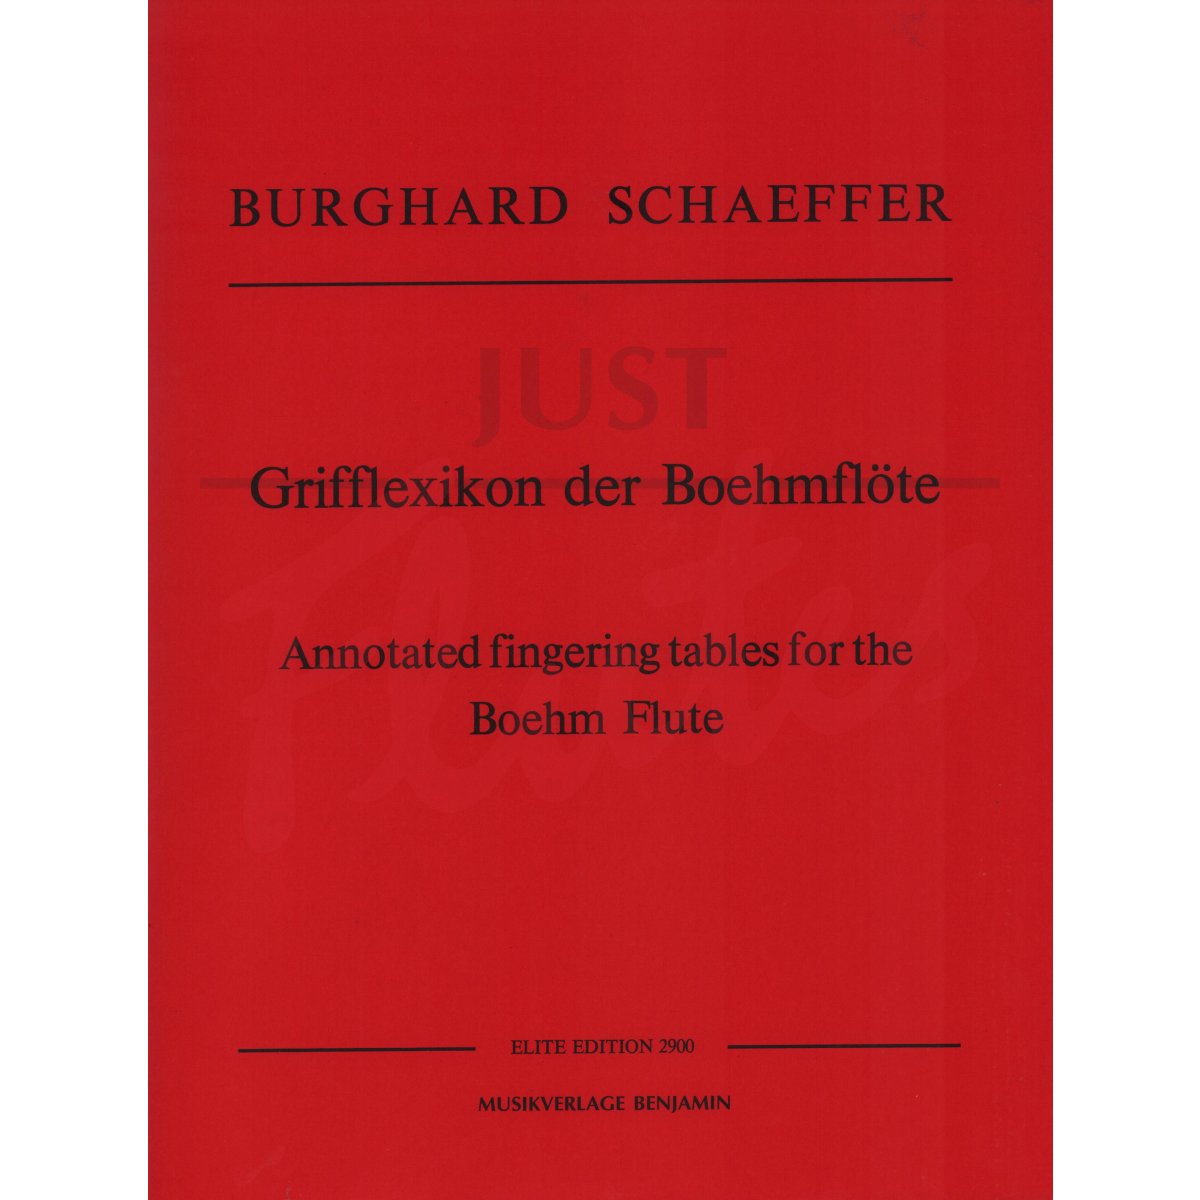 Annotated Fingering Tables for the Boehm Flute